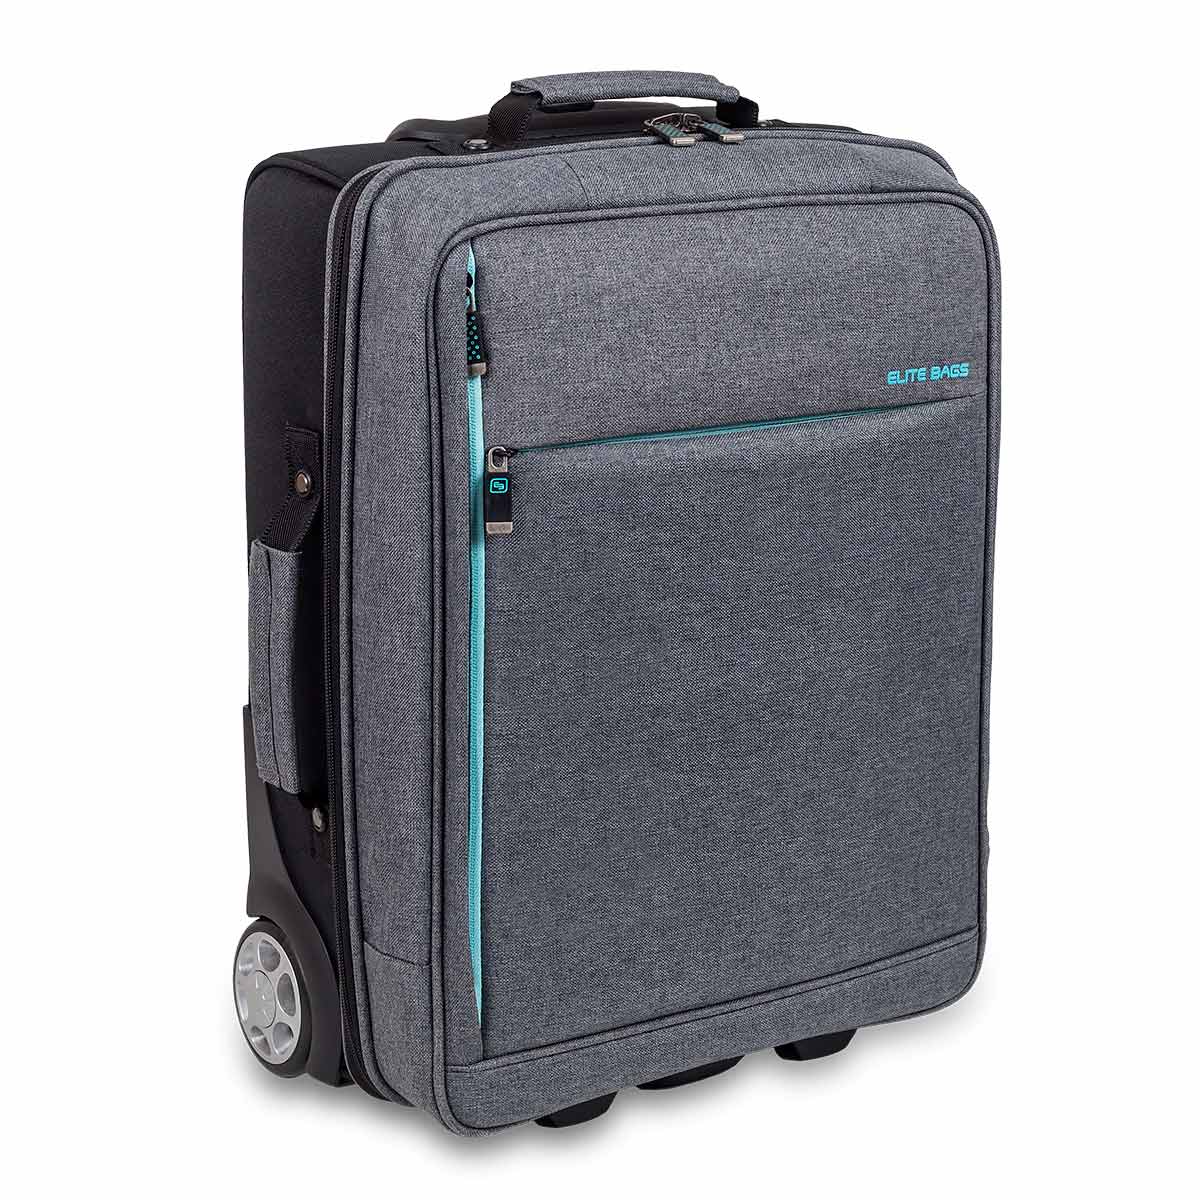 01-EB00.016-hovis-maletin-trolley-elite-bags-front